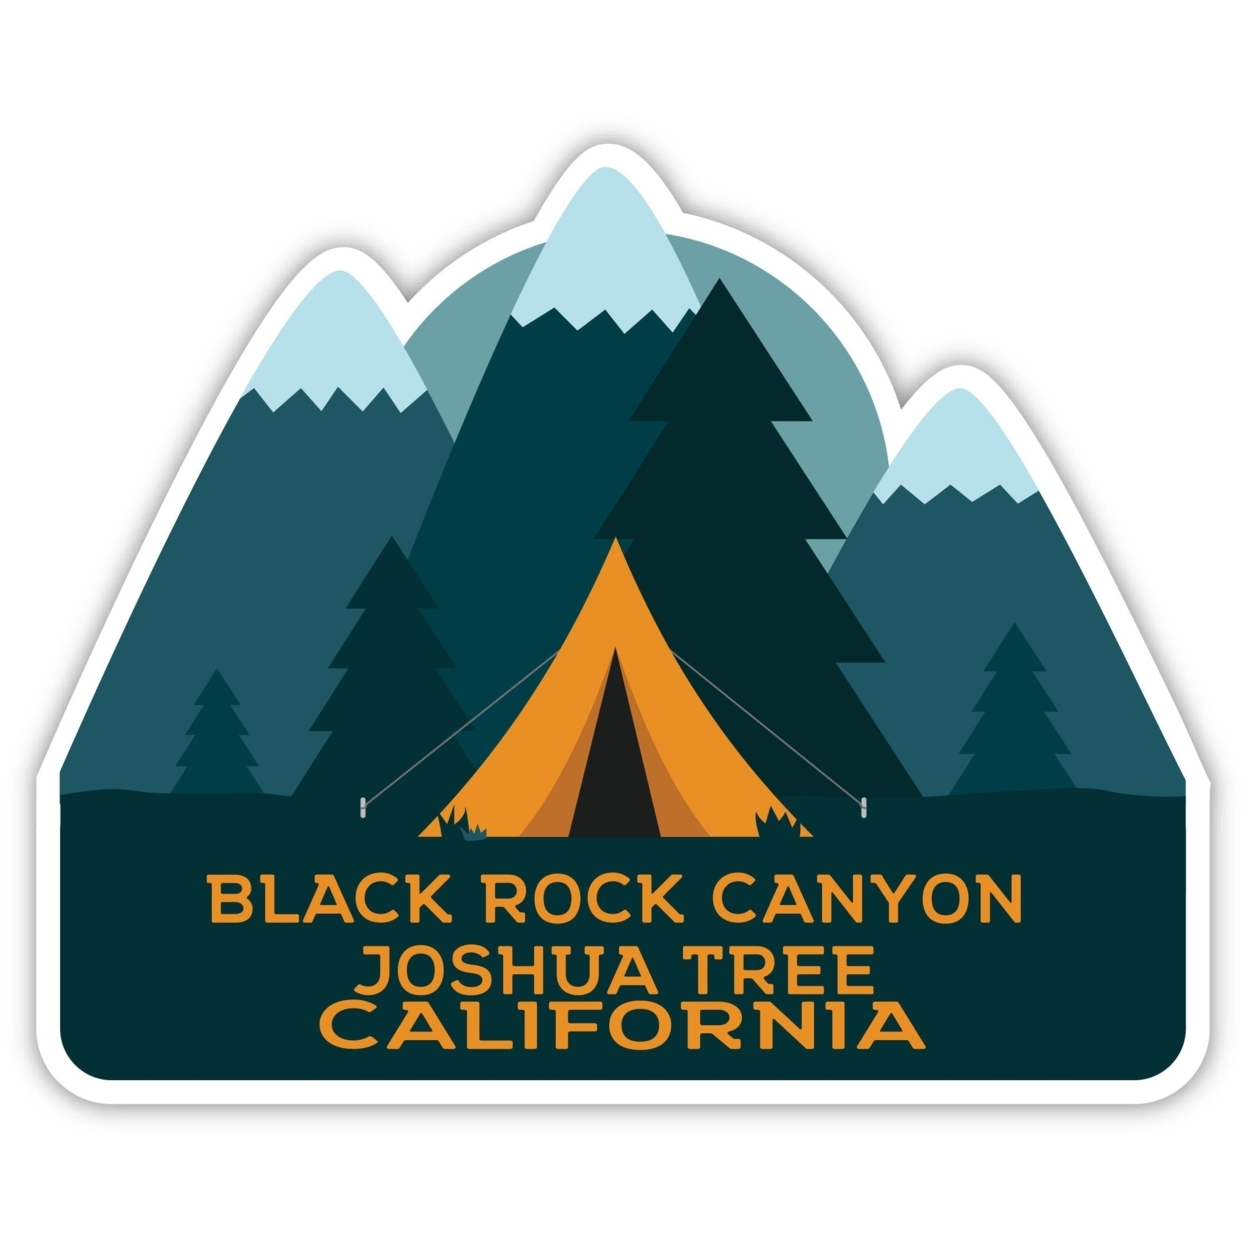 Black Rock Canyon Joshua Tree California Souvenir Decorative Stickers (Choose Theme And Size) - 4-Pack, 6-Inch, Tent